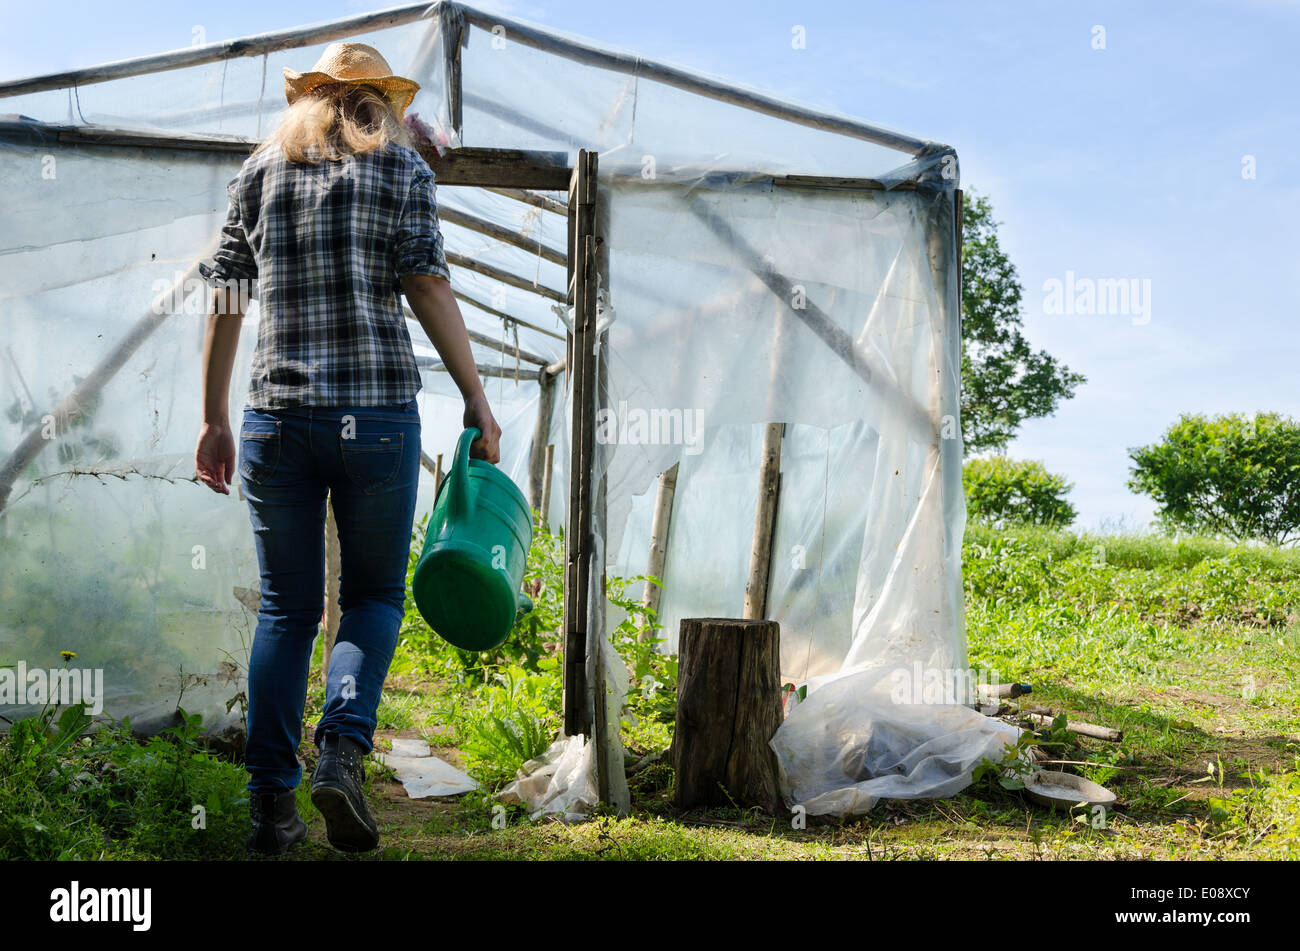 Gardener woman with watering-can tool walk in handmade greenhouse conservatory. Stock Photo